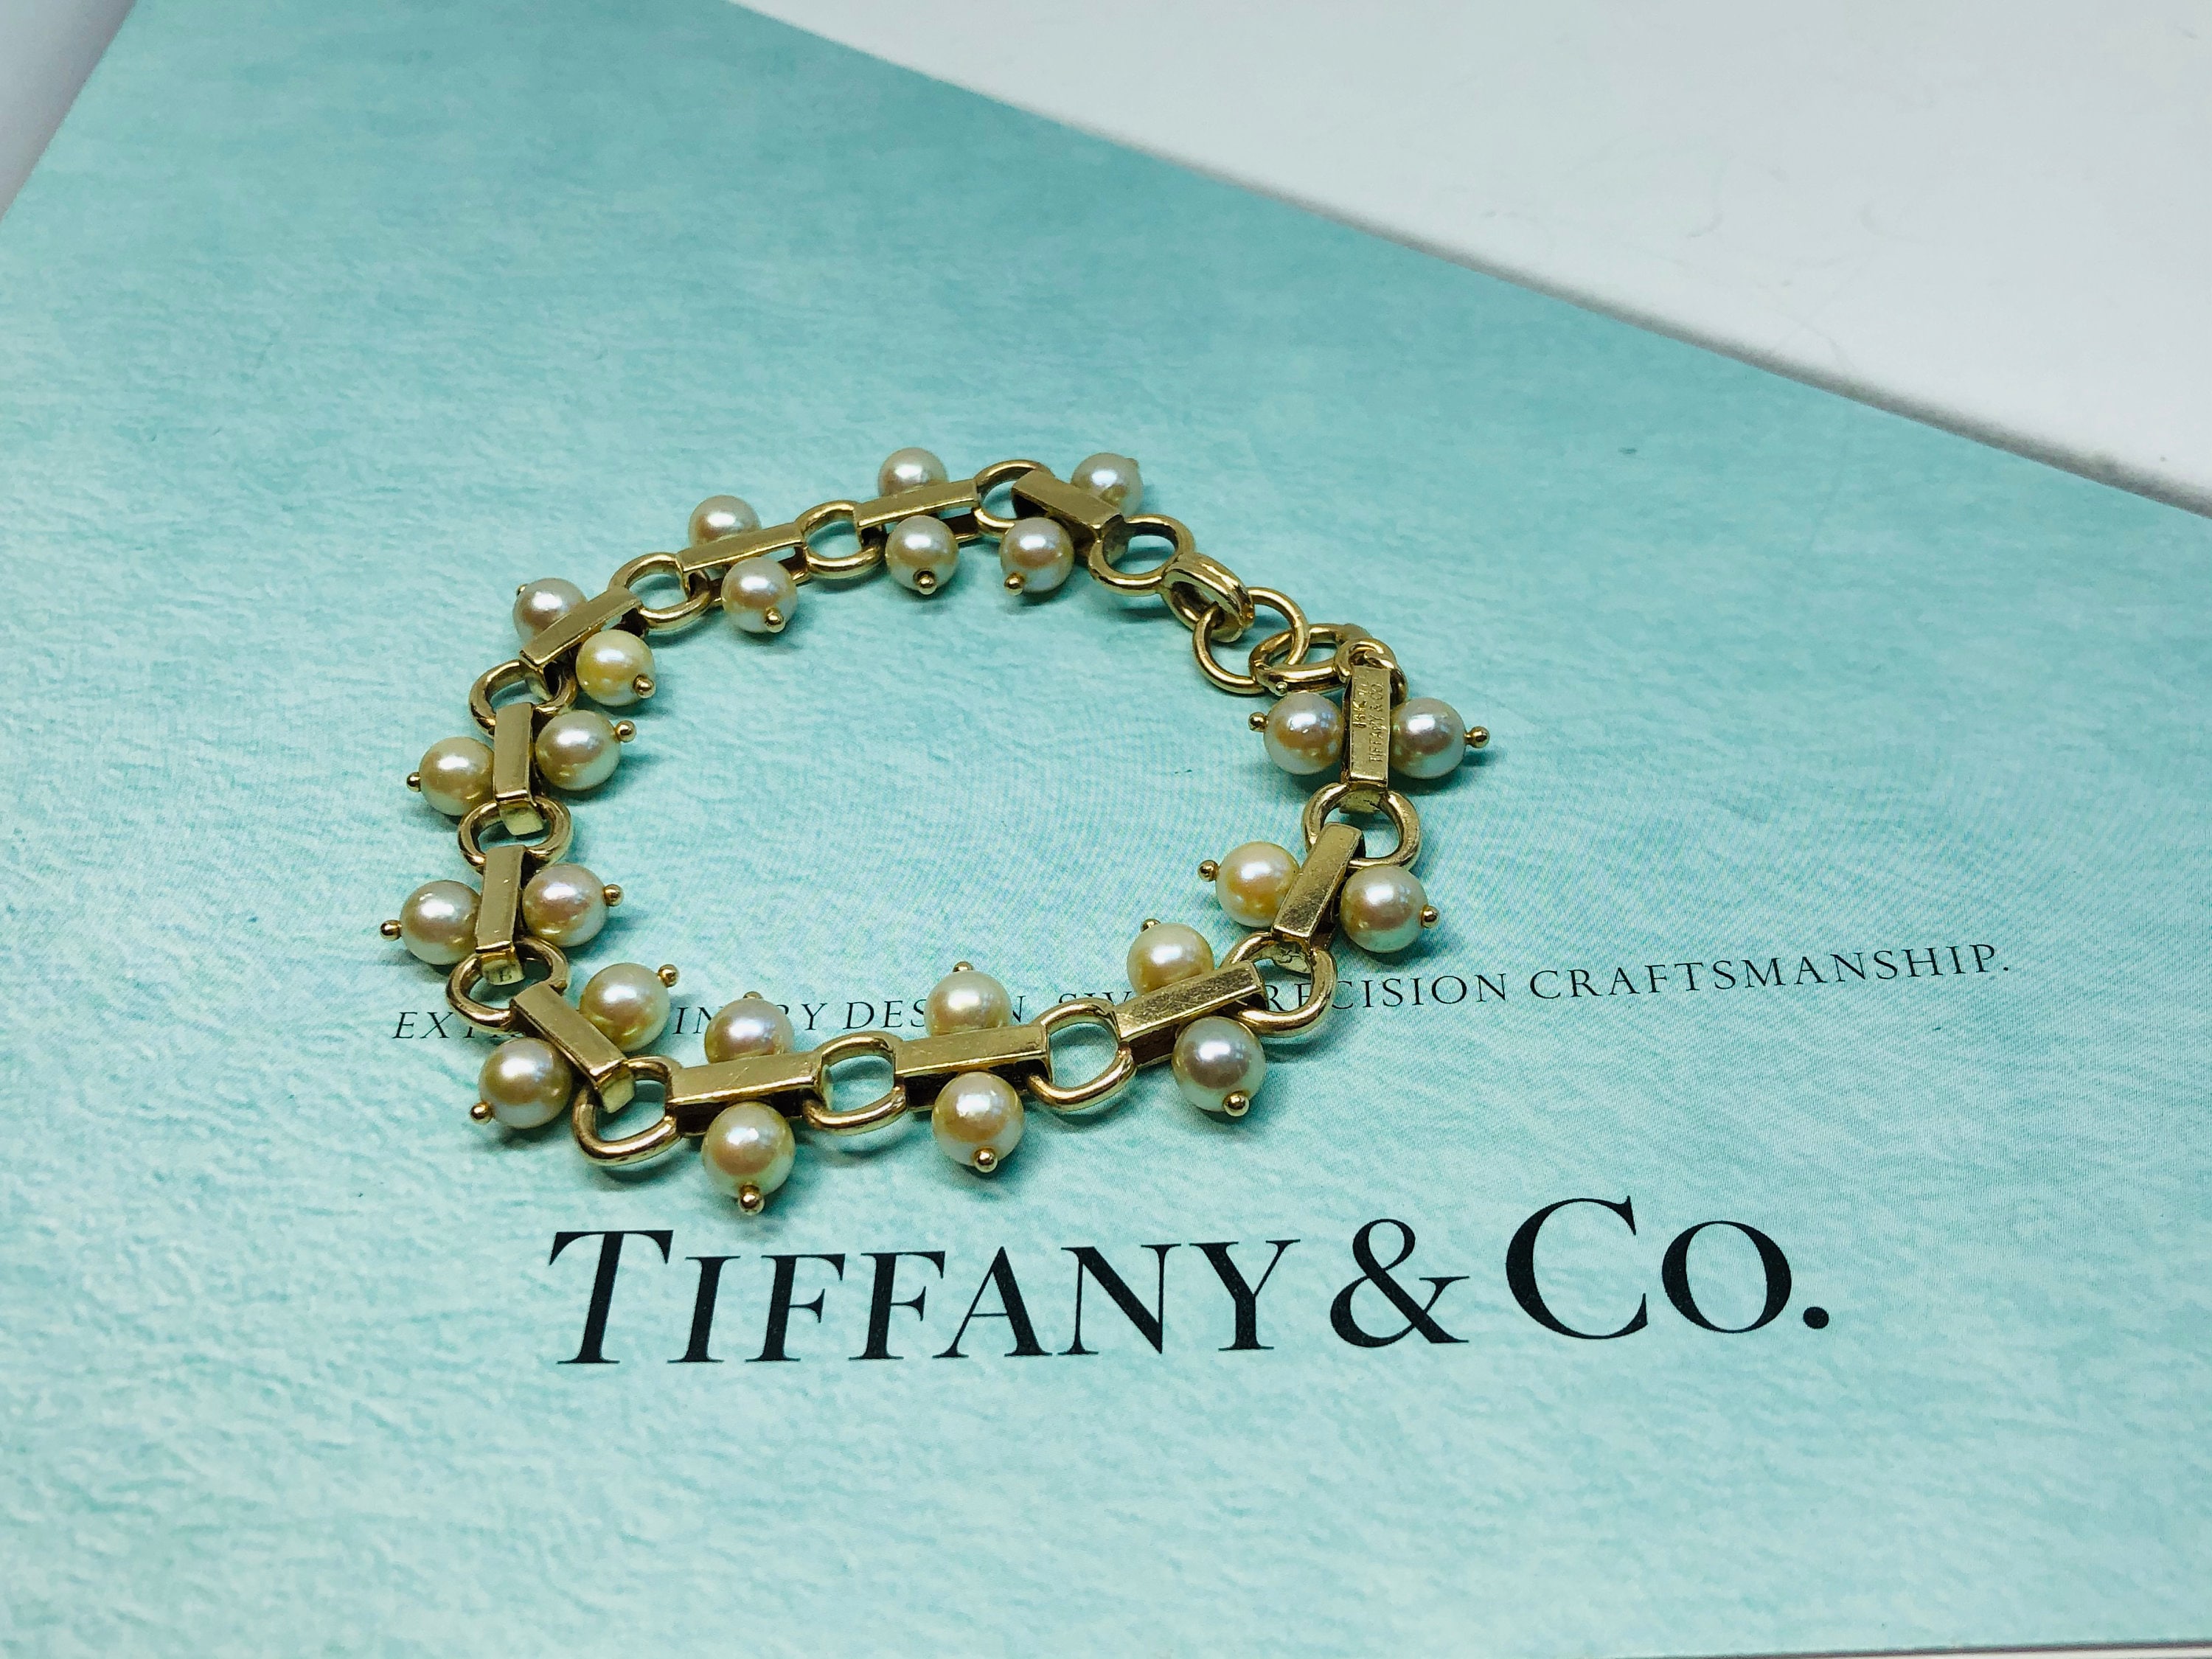 Vintage Tiffany & Co. 14k Yellow Gold Bracelet with Charms – Nally Jewels